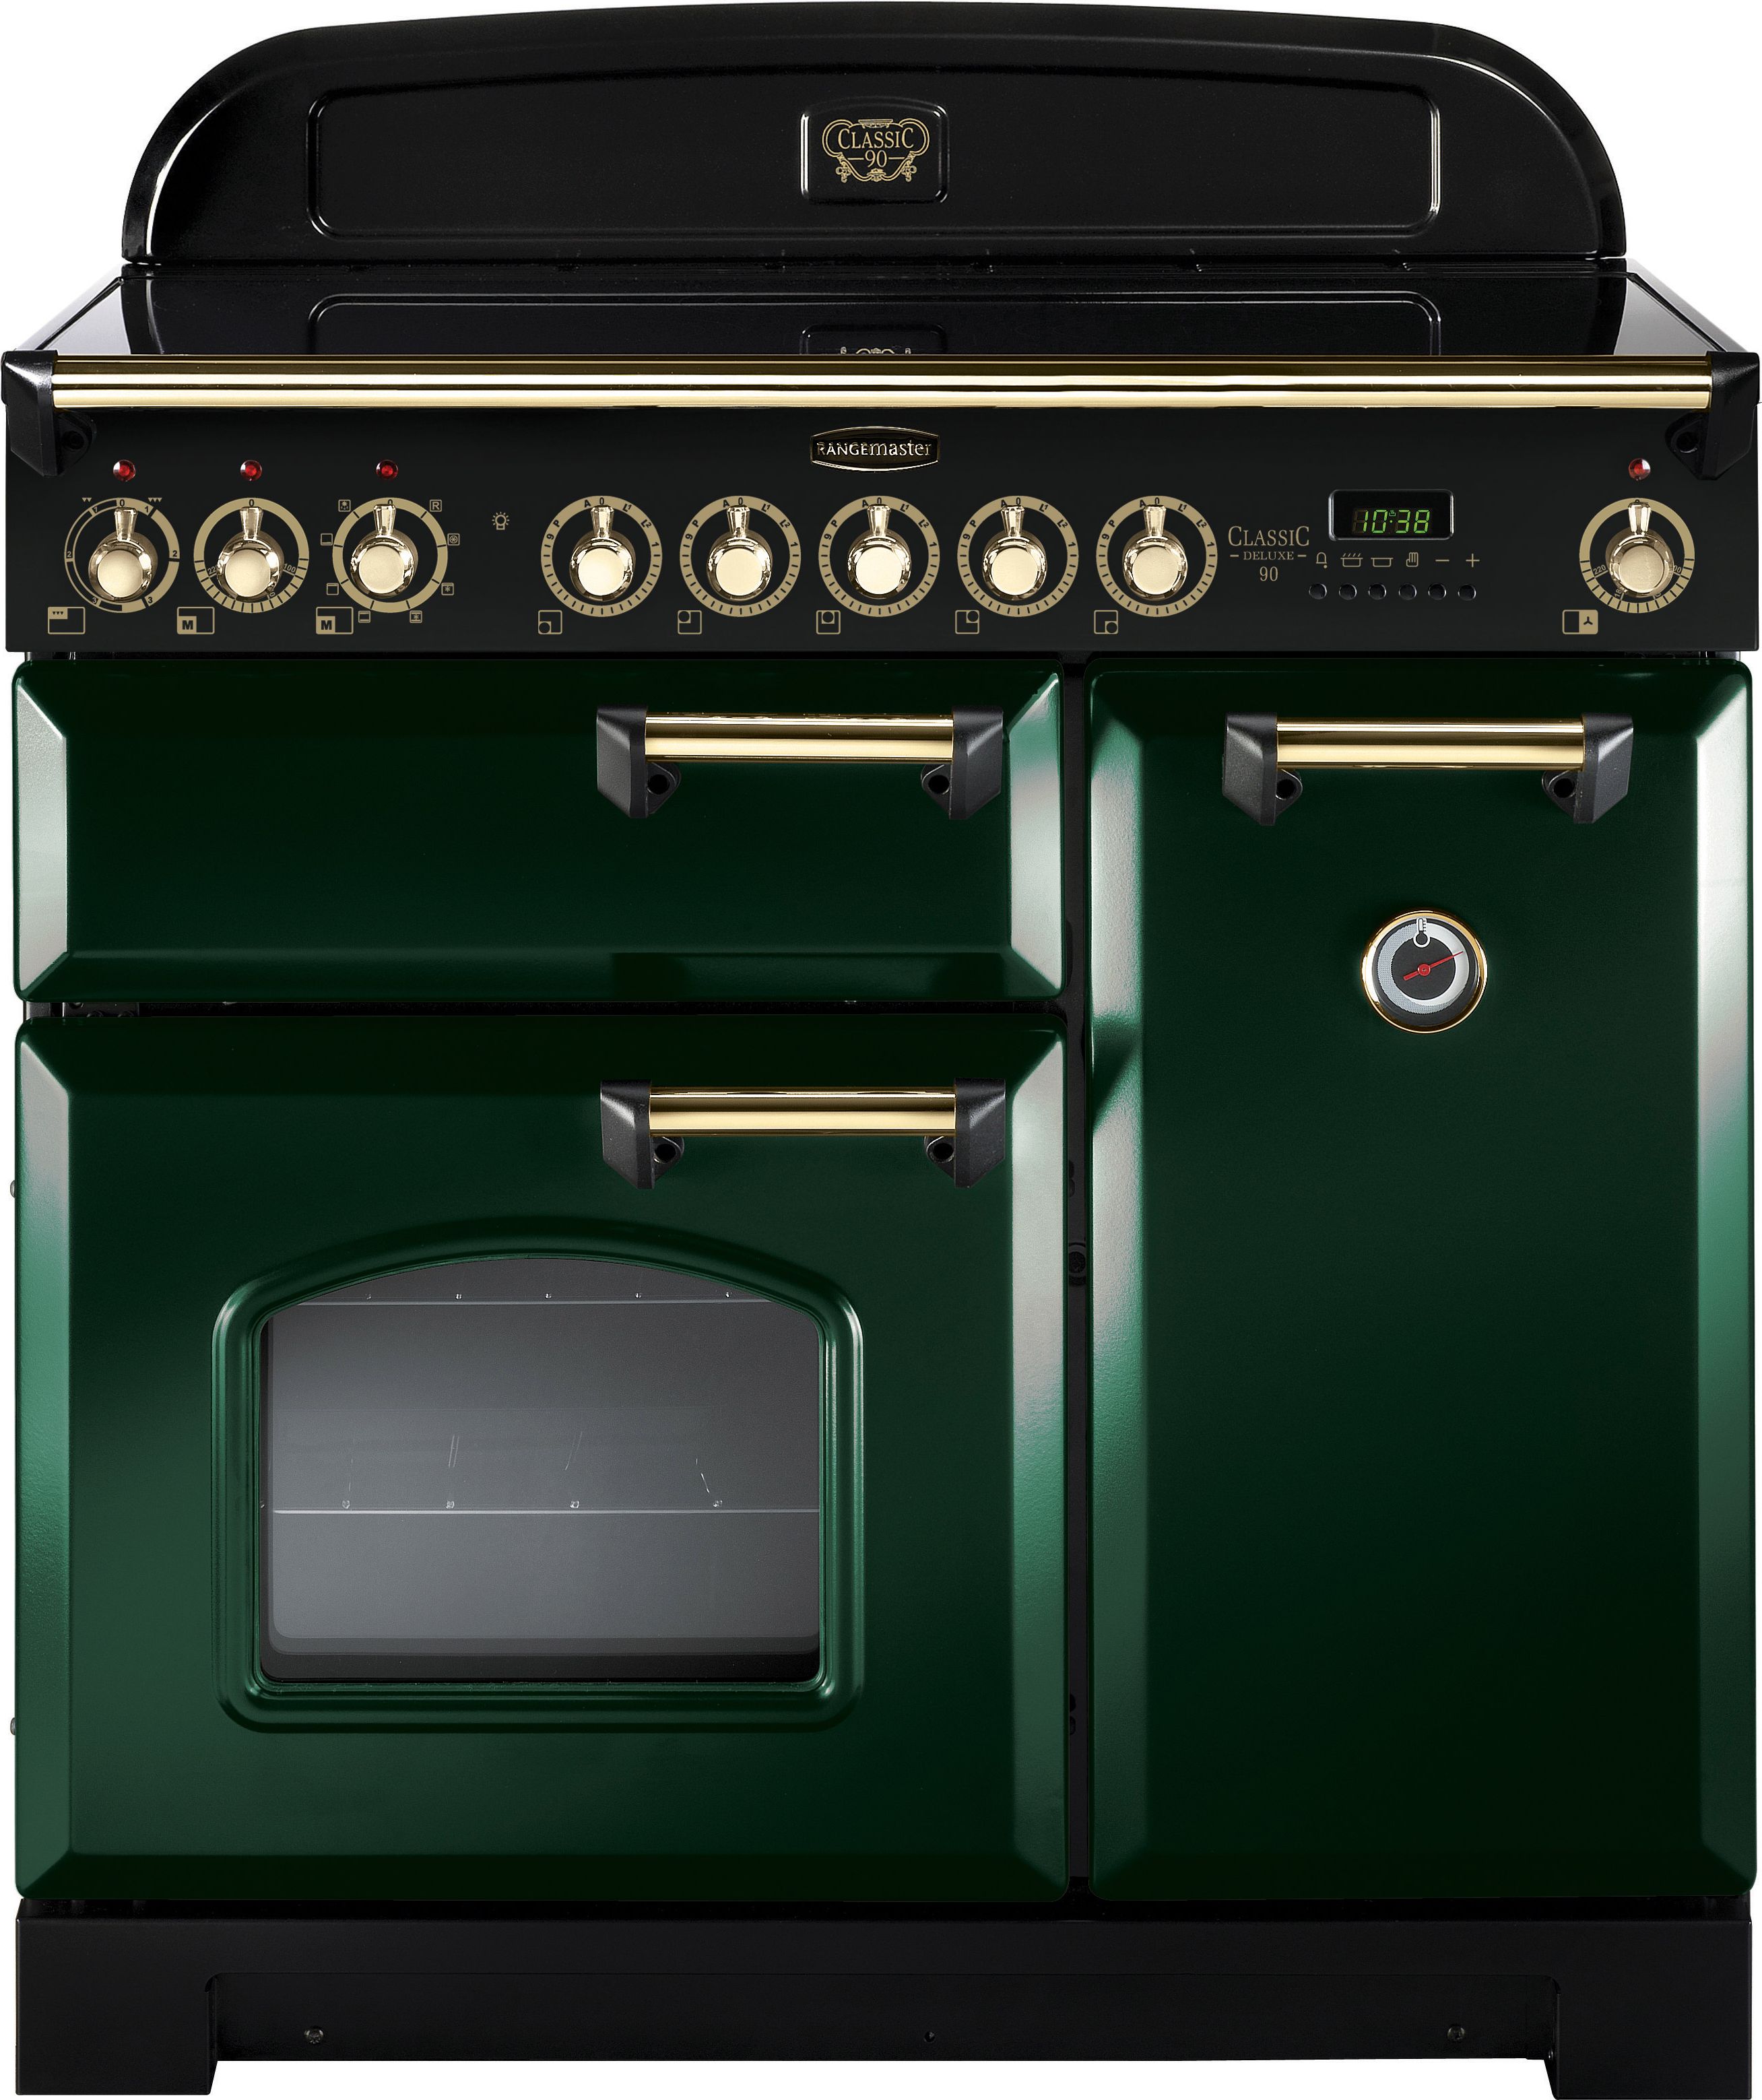 Rangemaster Classic Deluxe CDL90ECRG/B 90cm Electric Range Cooker with Ceramic Hob - Racing Green / Brass - A/A Rated, Green